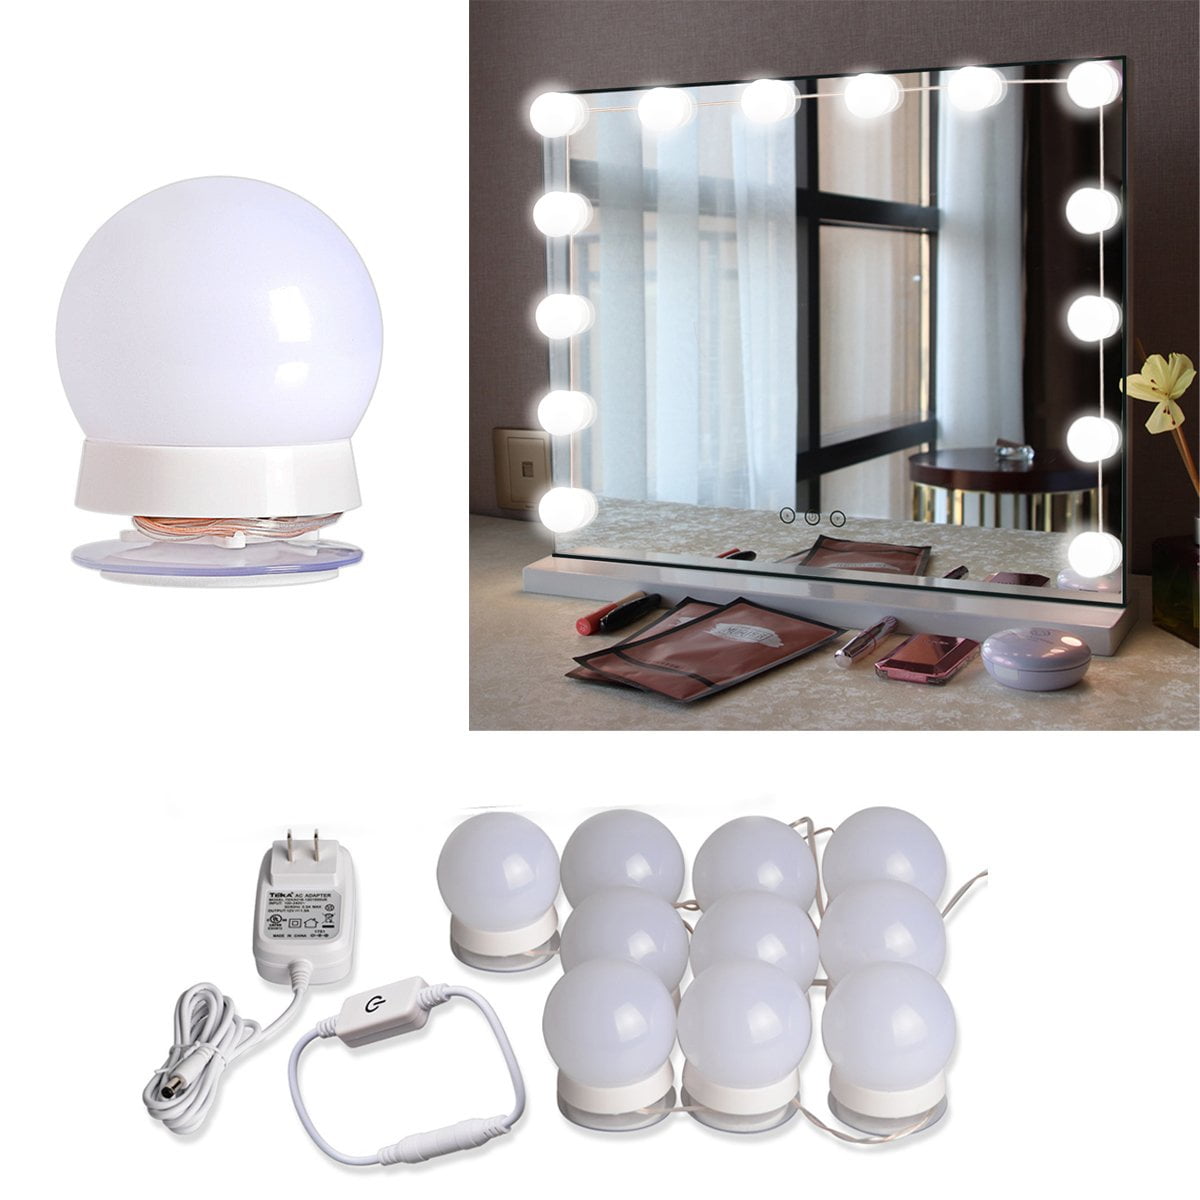 Hollywood Face Care Led Light Stick On, Hollywood Lights Vanity